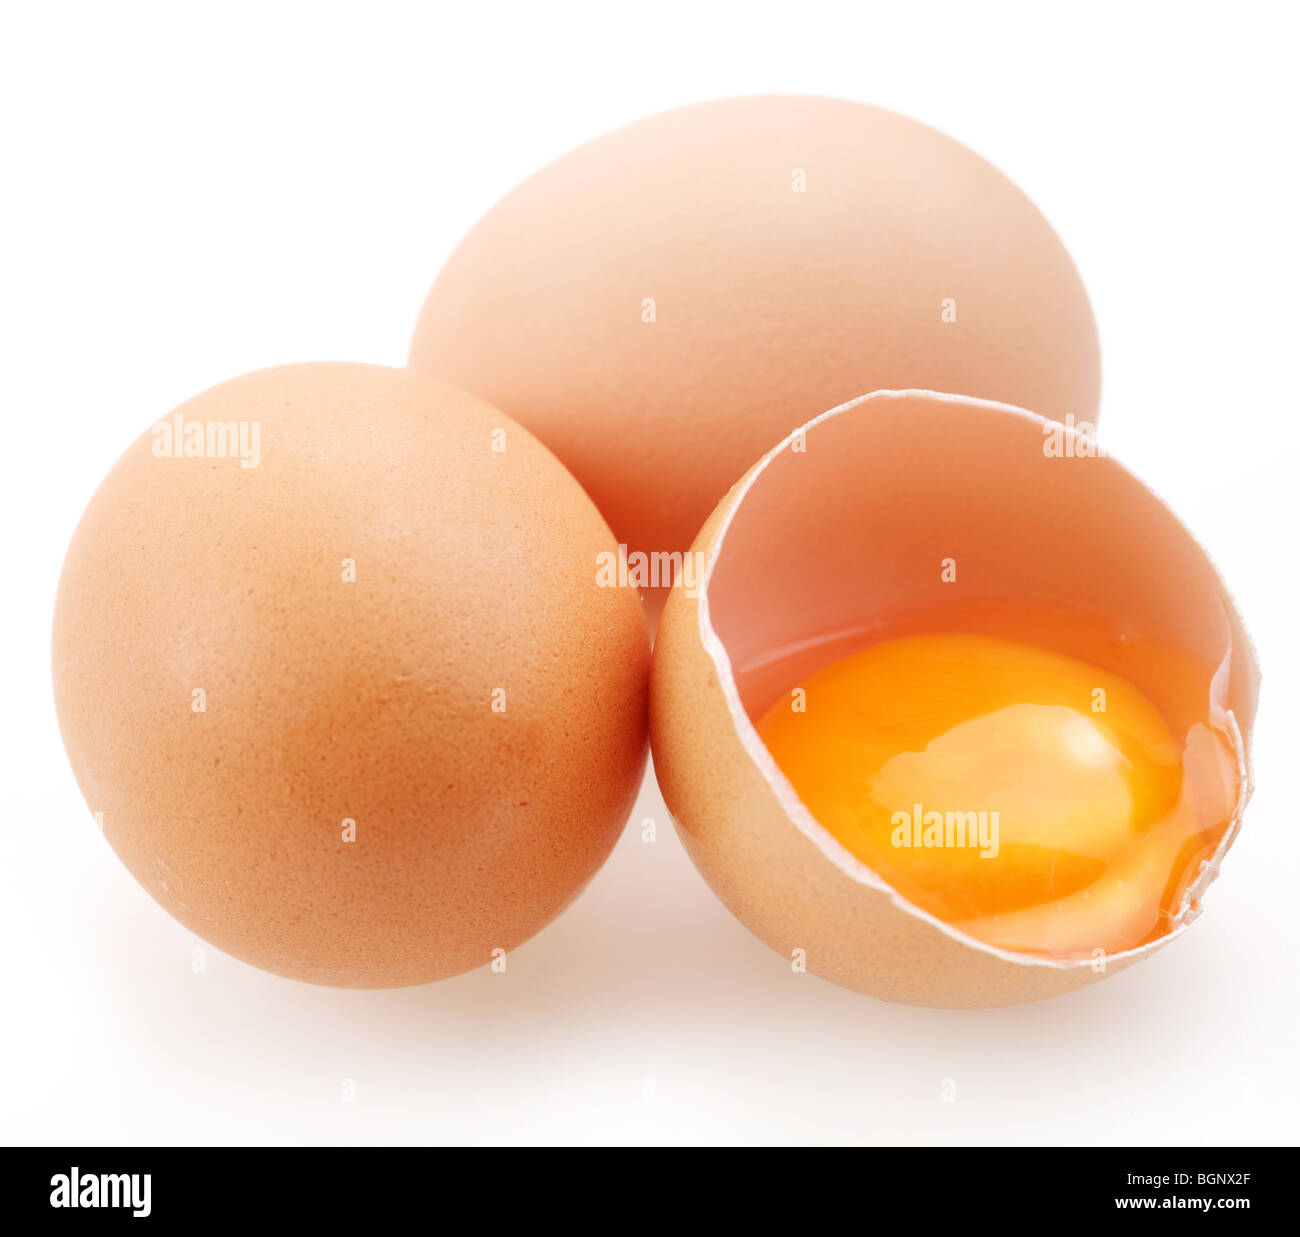 With brown eggs on a white background. One egg is broken. Stock Photo